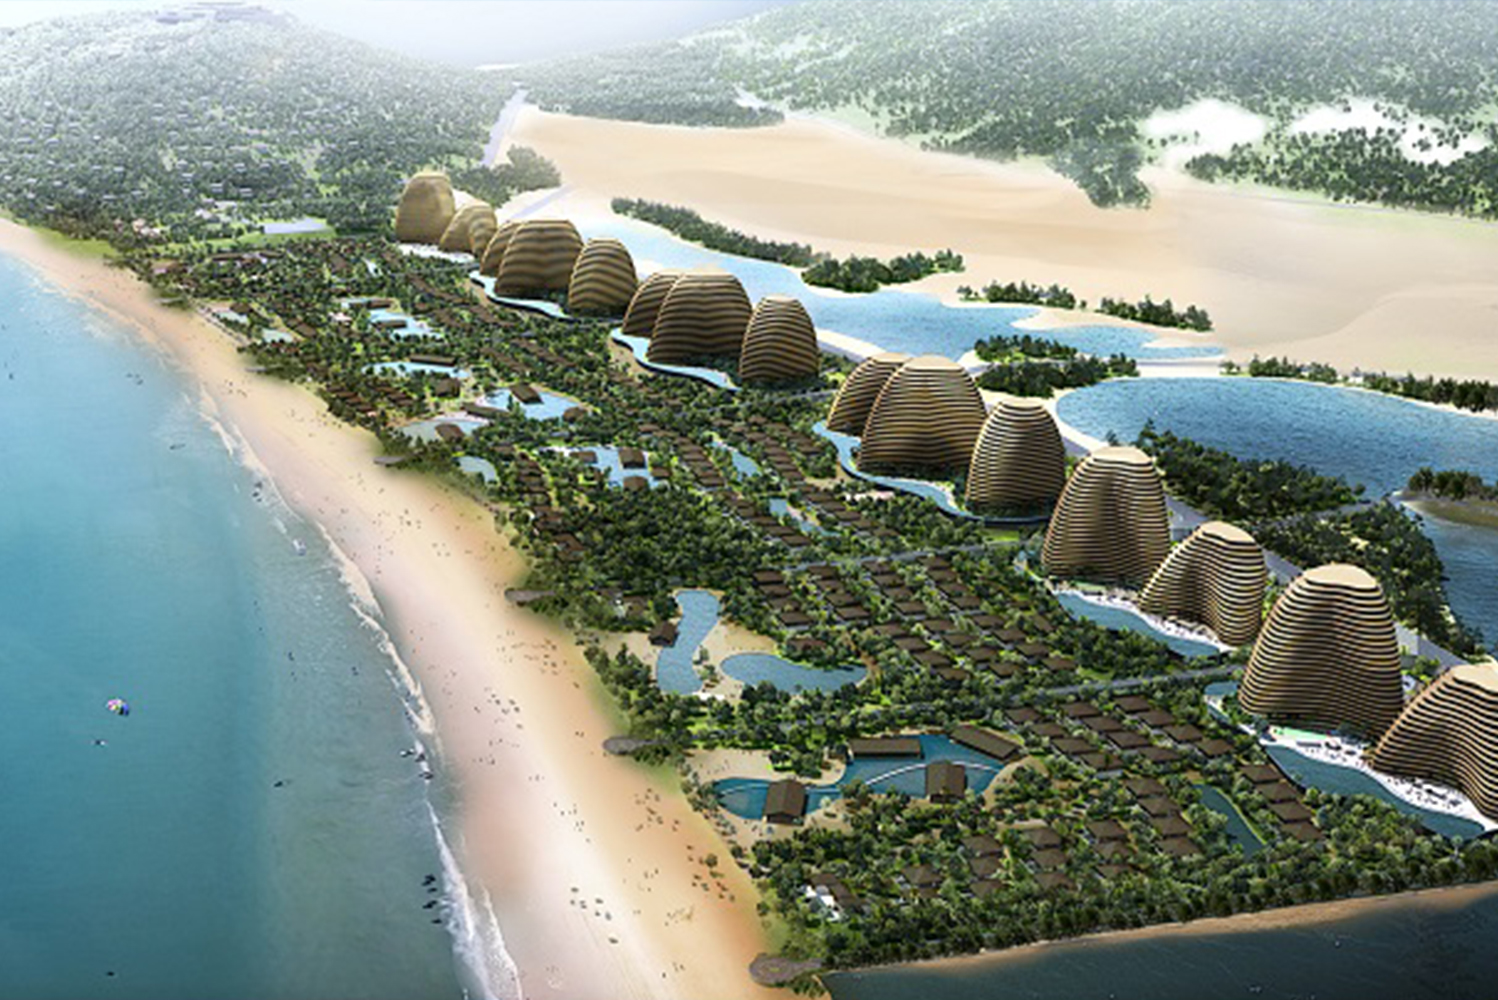 Chapman Taylor designed the masterplan for the 1100000 square meter 11840301 square foot Mui Dinh eco-resort in Vietnam